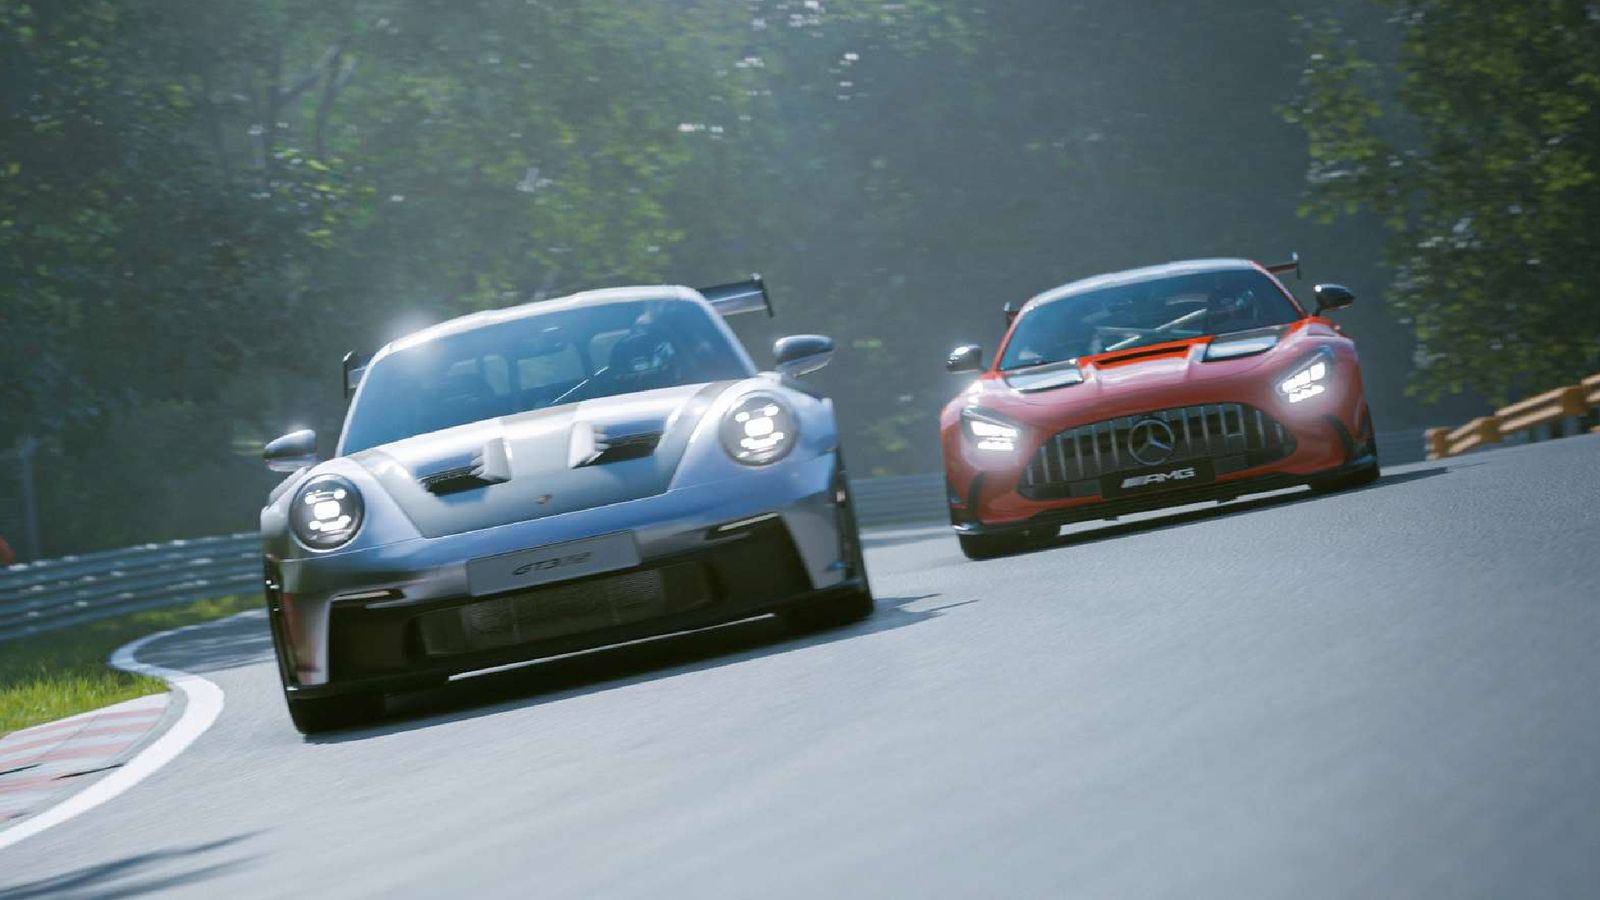 A silver Porsche racing ahead of a red AMG Mercedes.